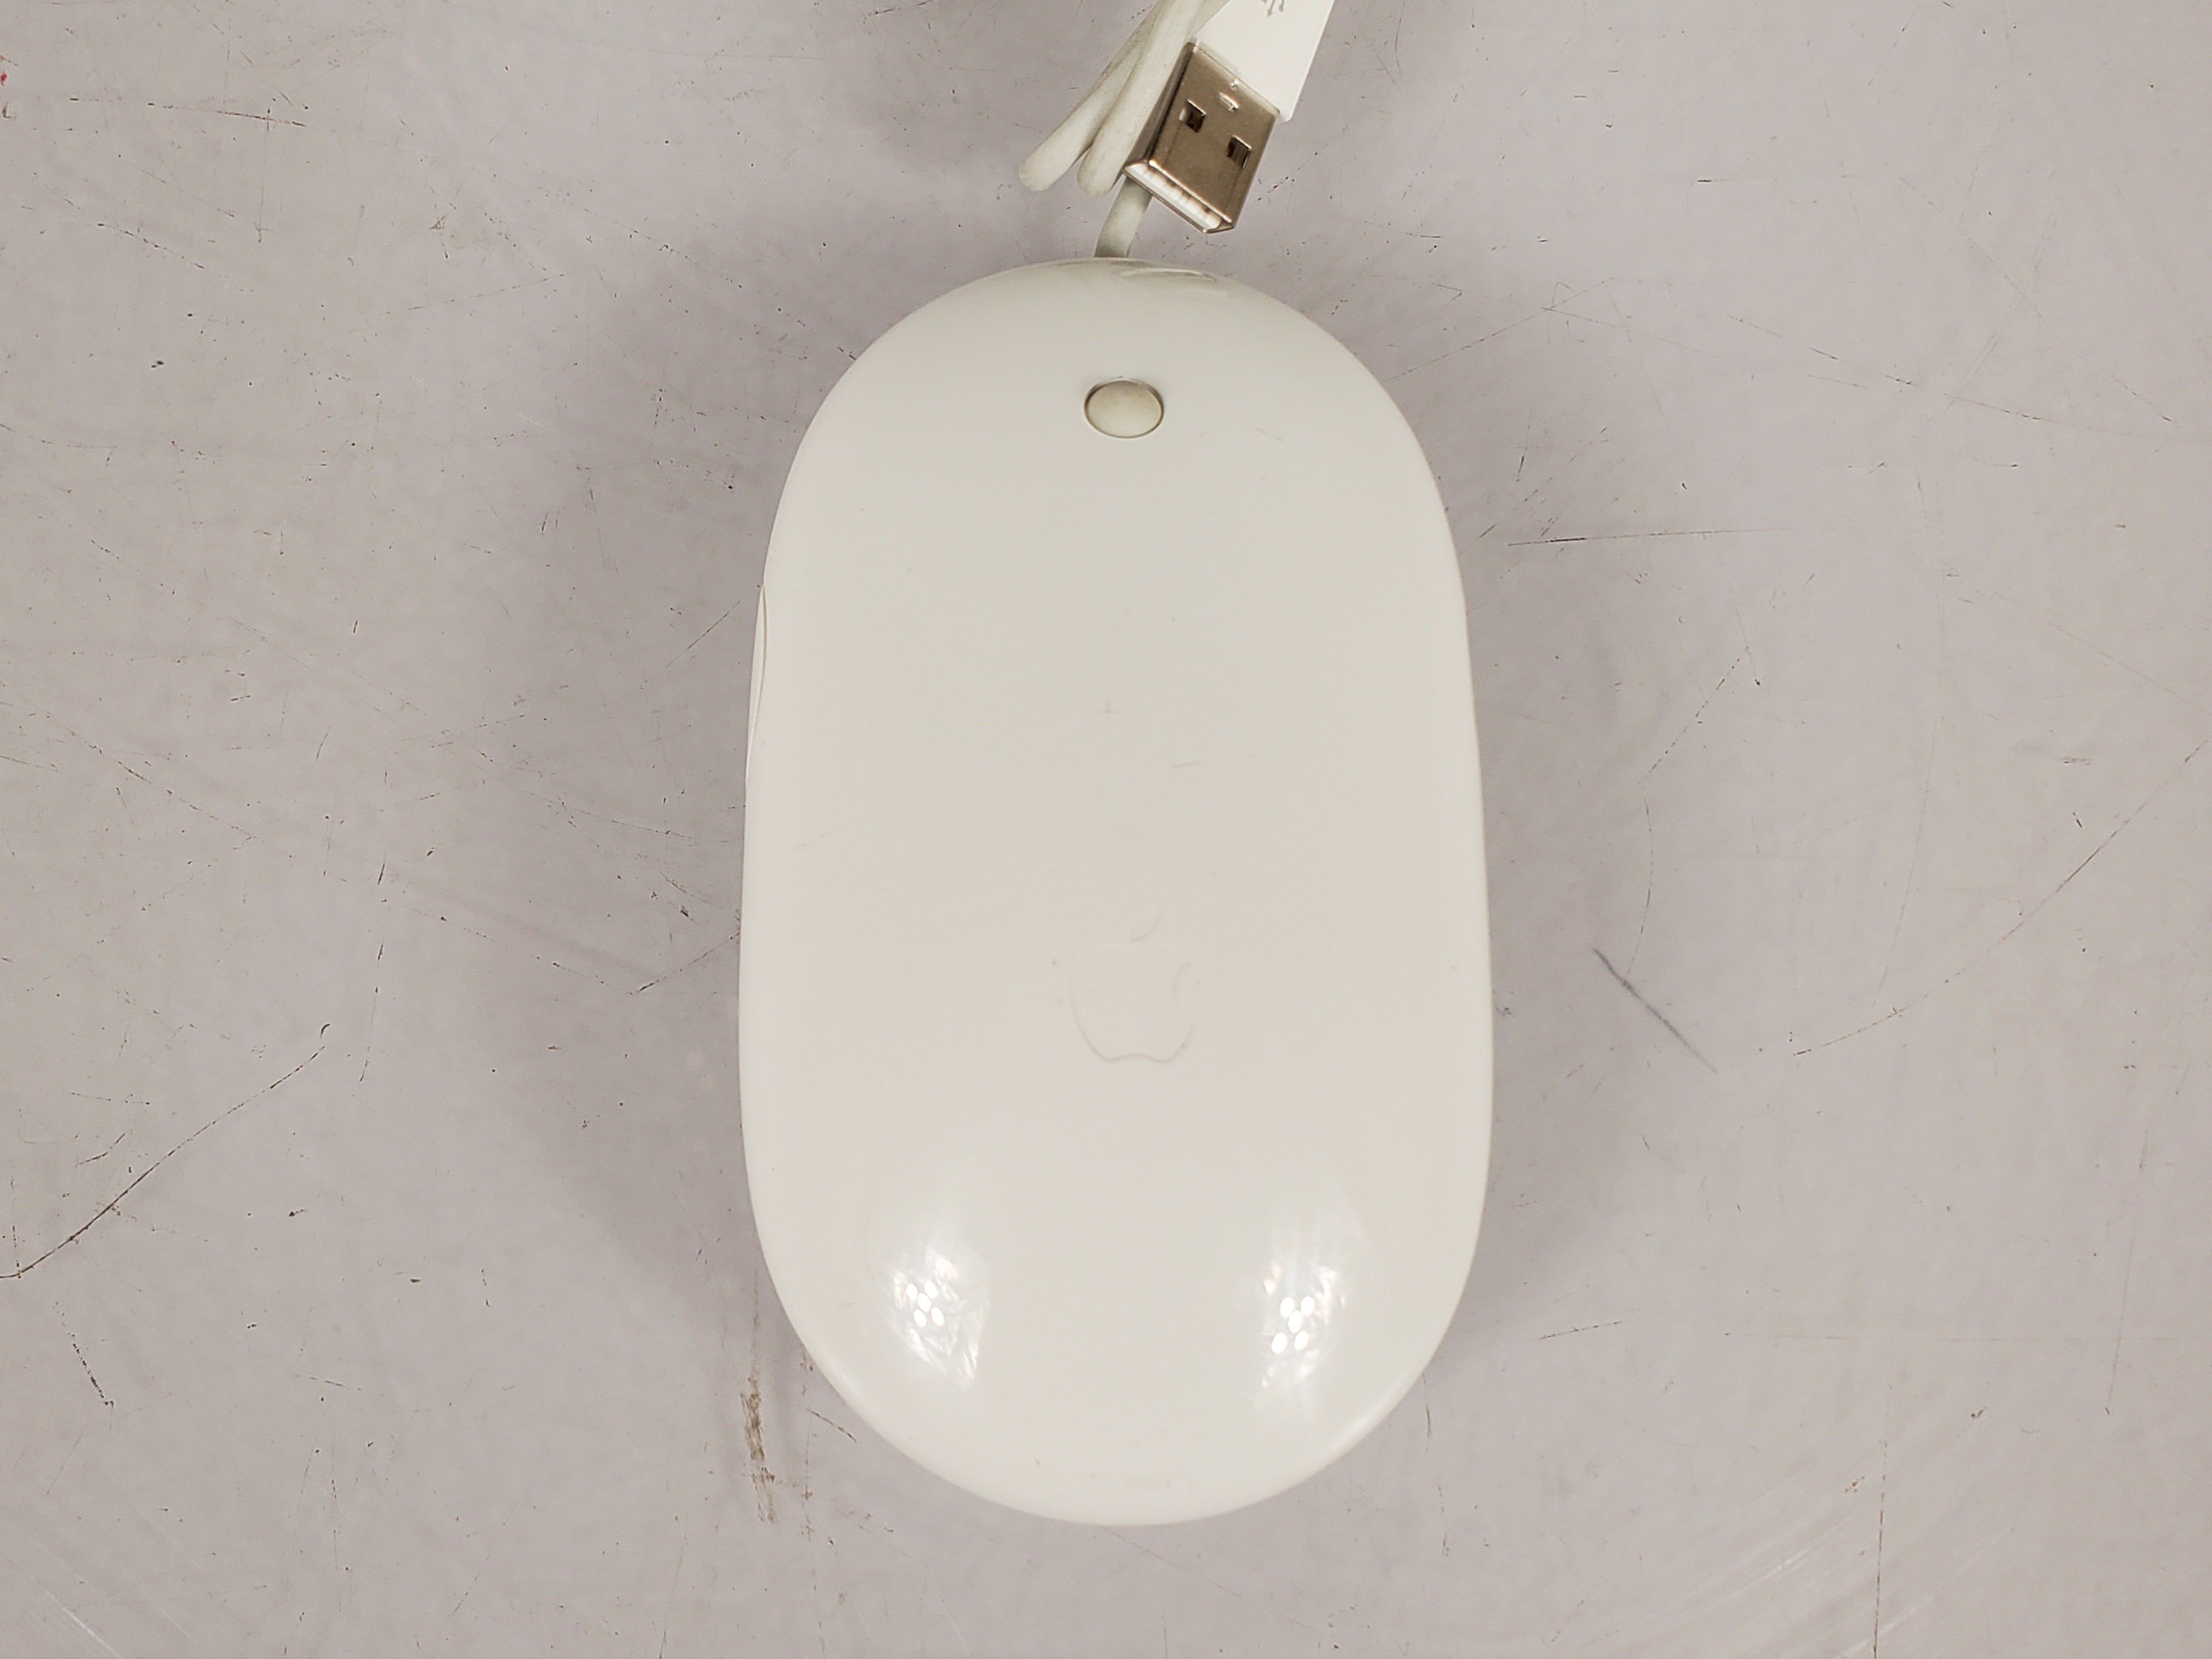 Apple Mighty Mouse USB